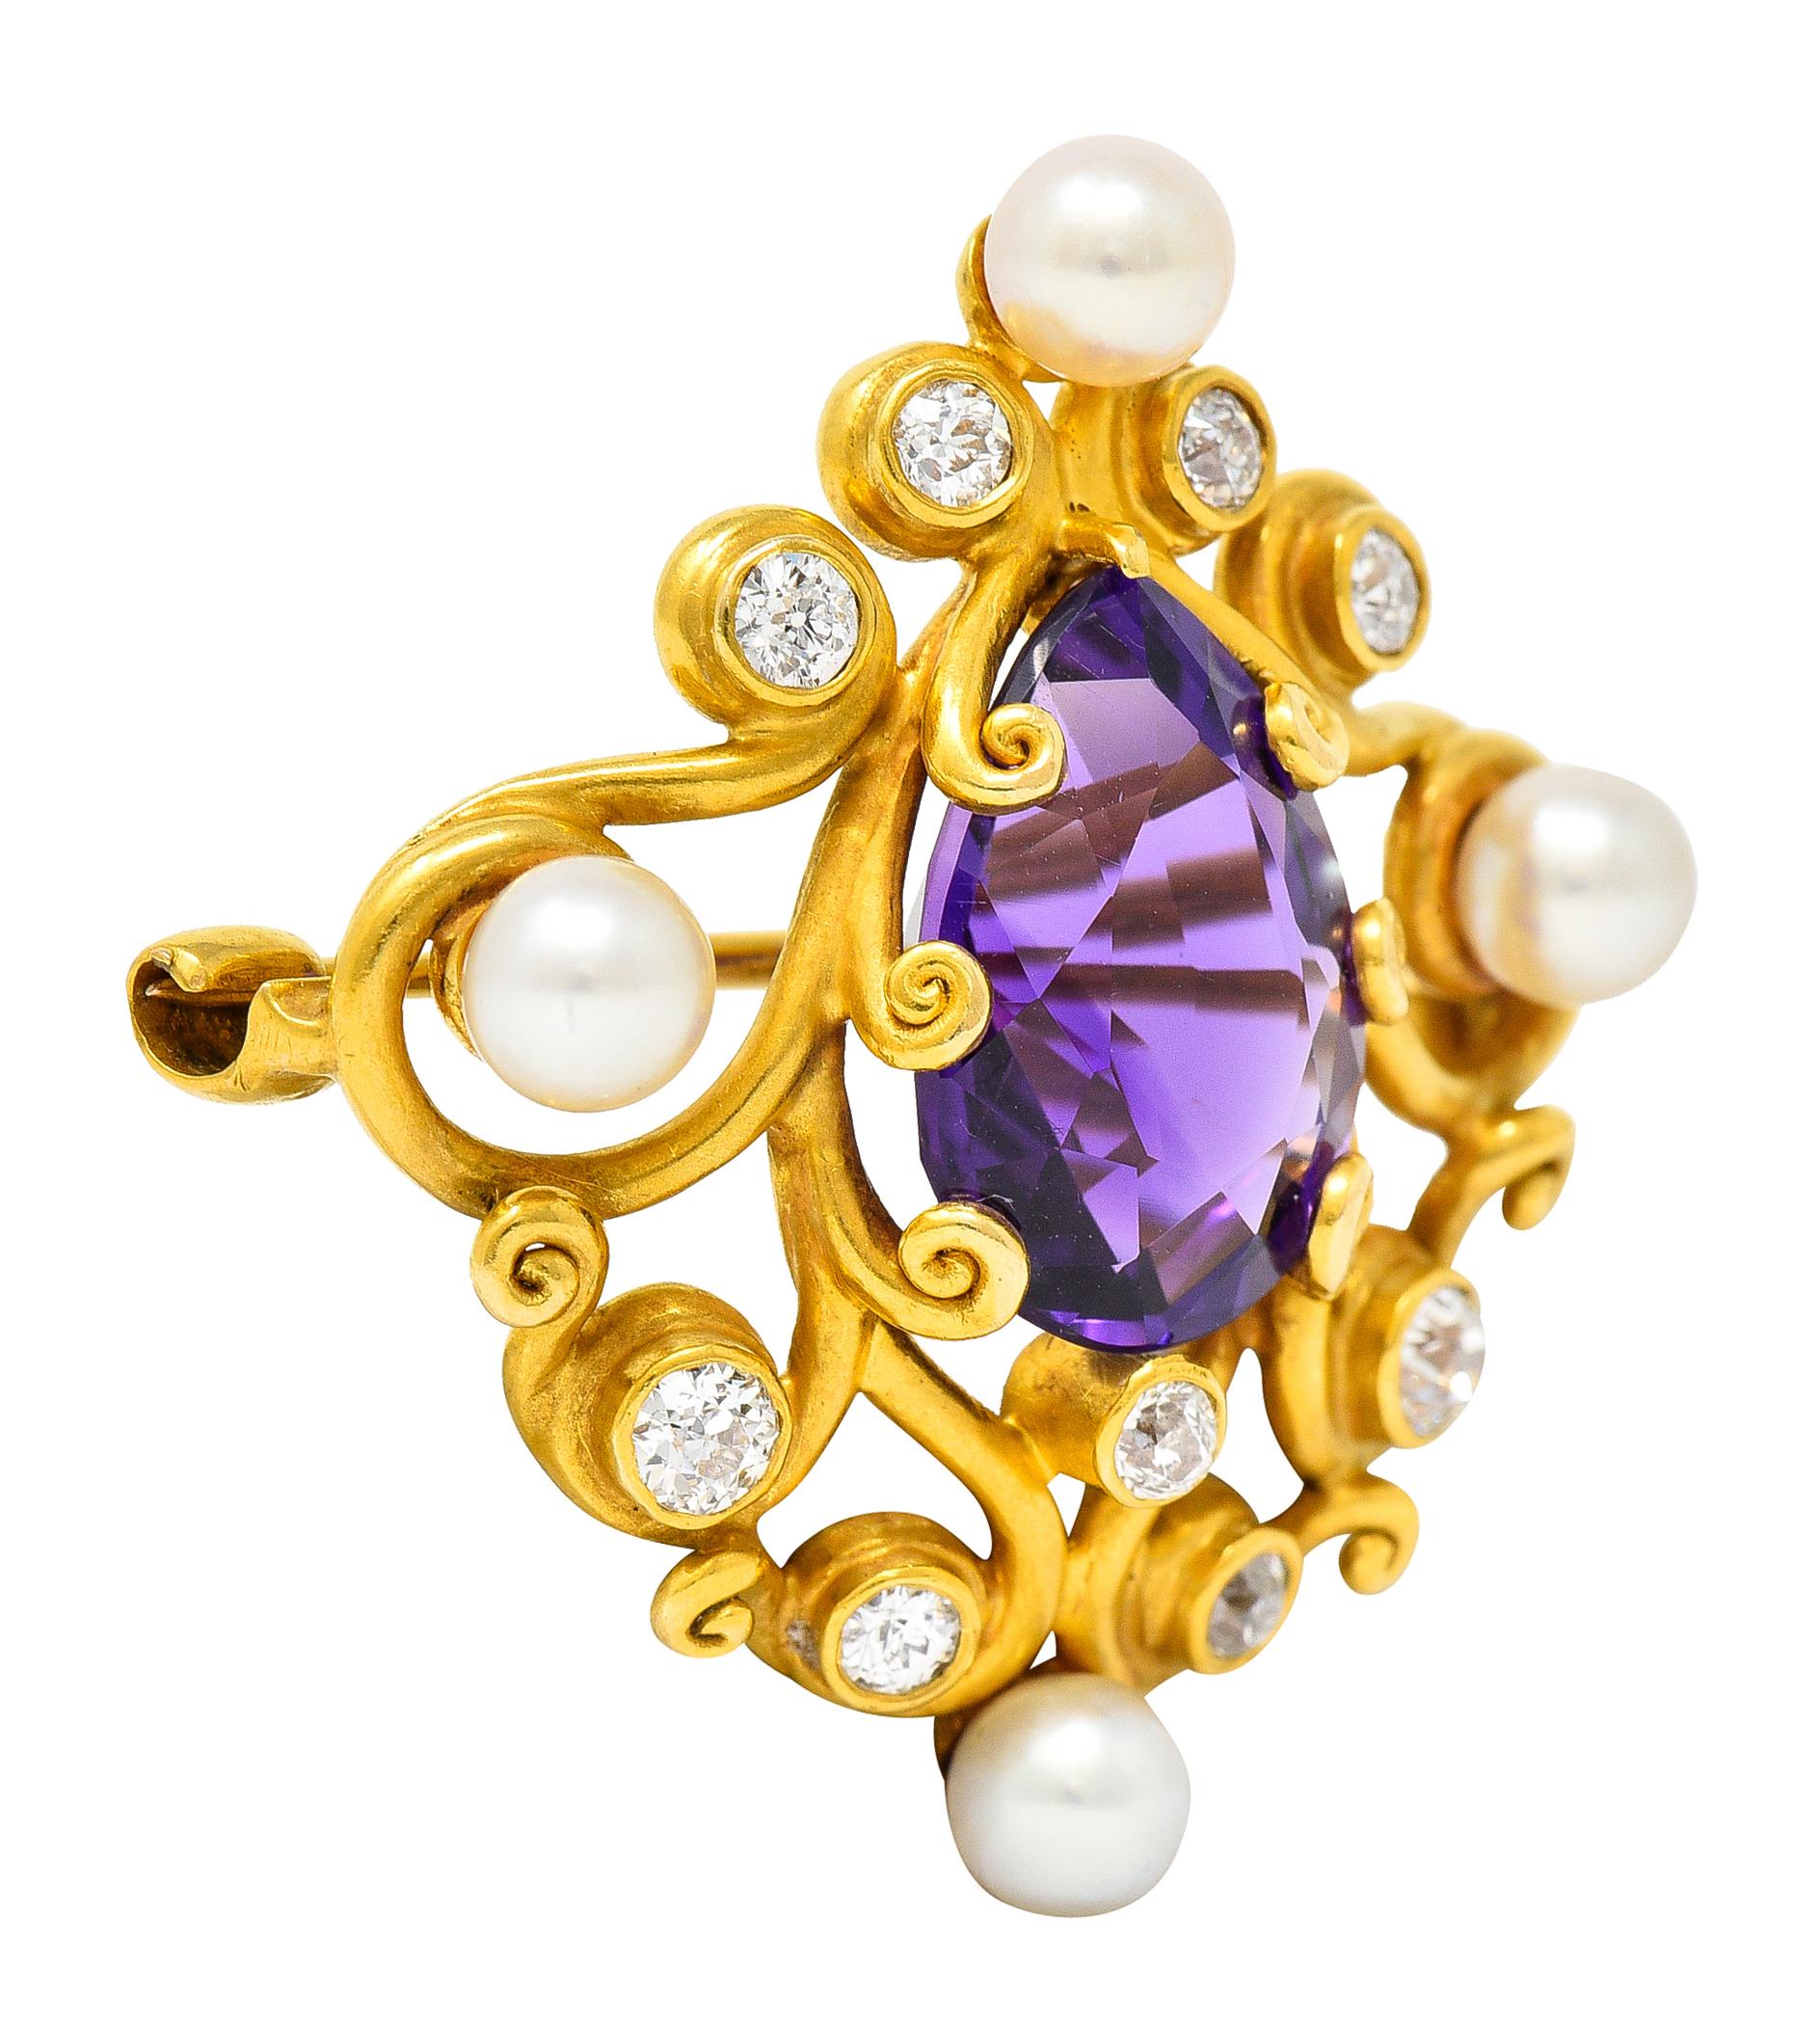 Brooch is designed as winding matte gold tendrils. Centering a pear cut amethyst measuring approximately 13.0 x 9.0 mm. Eye clean and richly purple in color with medium saturation. With 4.0 mm round pearls at each cardinal point. Well matched, white